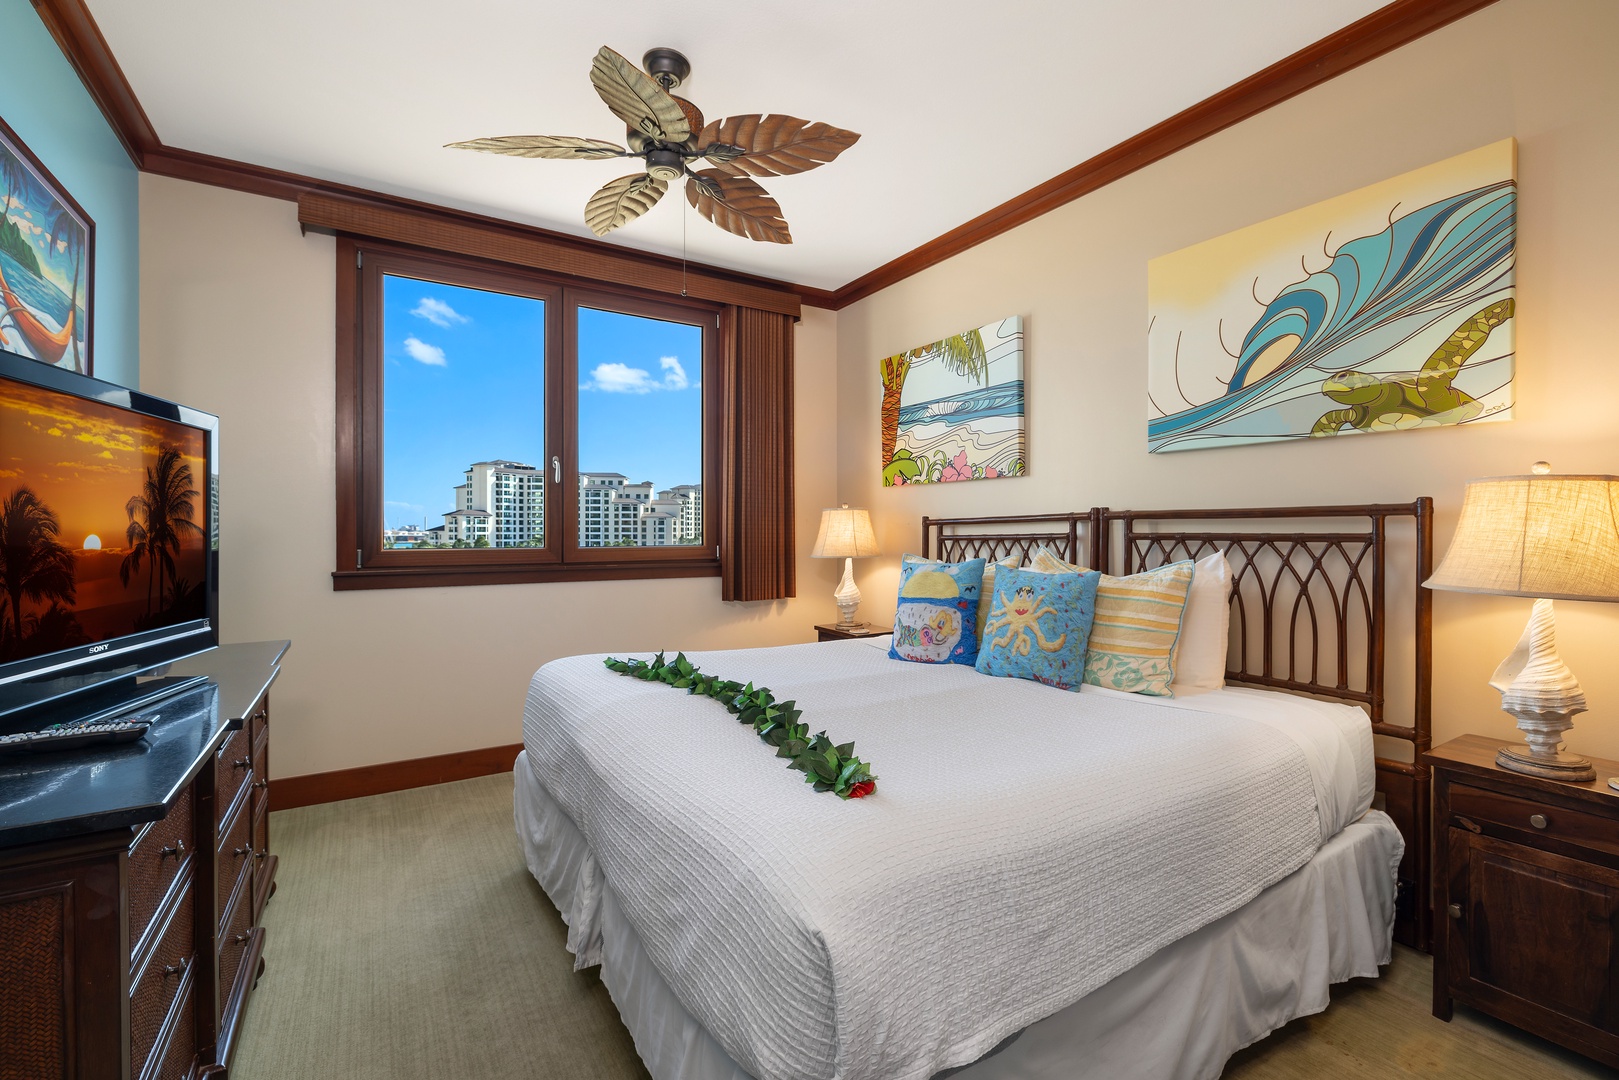 Kapolei Vacation Rentals, Ko Olina Beach Villas O724 - Versatile bedroom with a bed that can convert to twins, tropical-inspired decor, and a view of urban scenery.